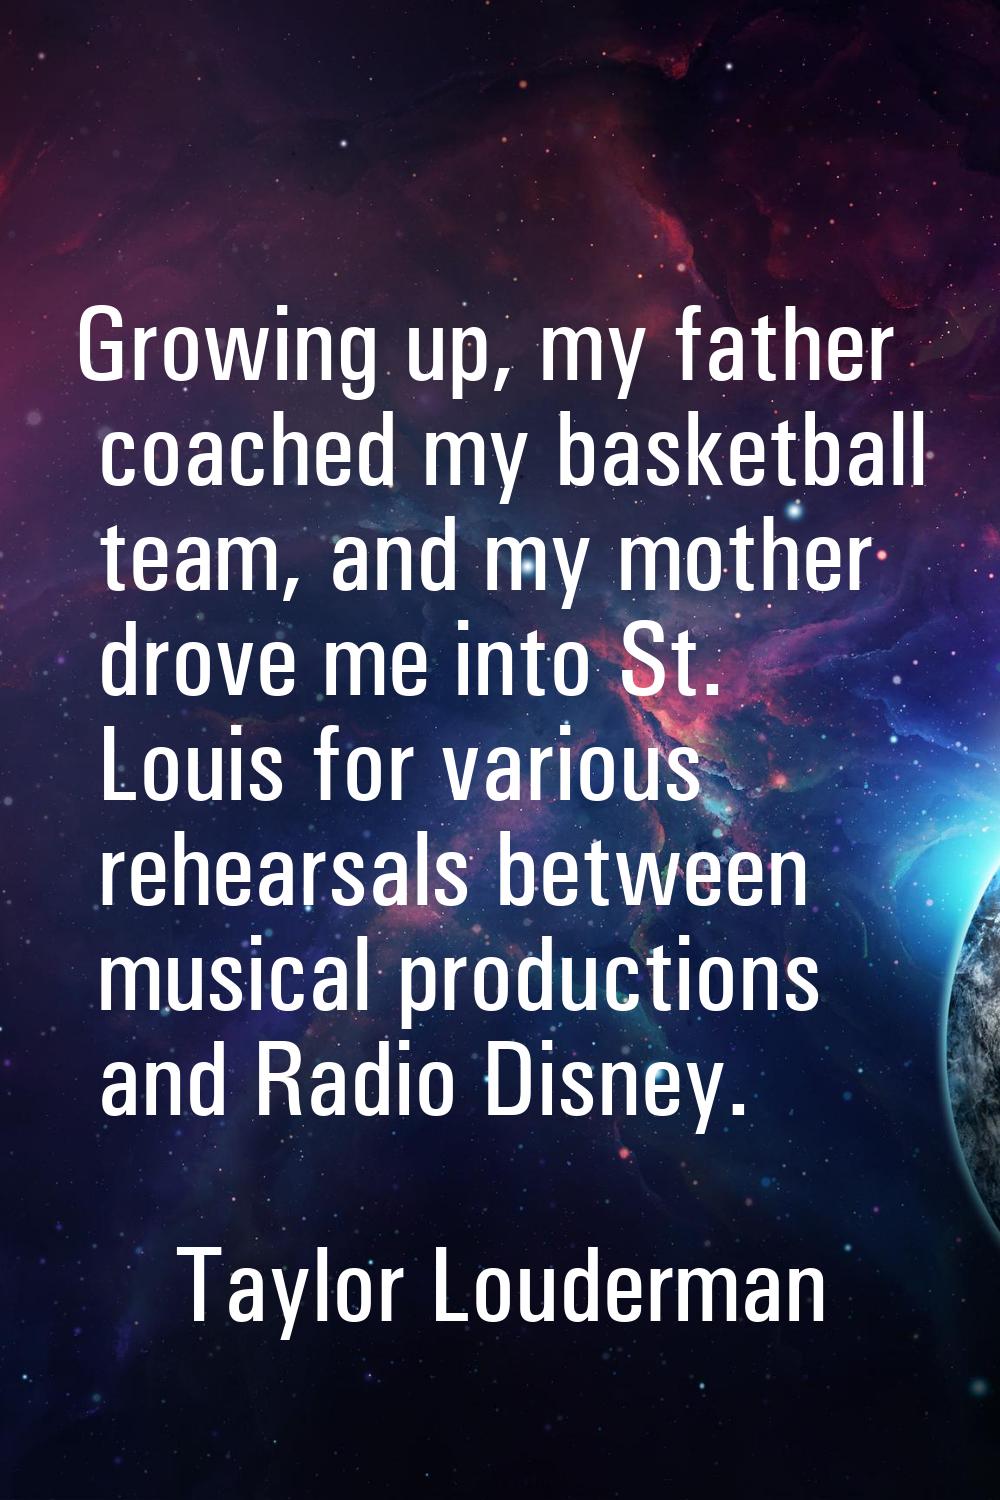 Growing up, my father coached my basketball team, and my mother drove me into St. Louis for various